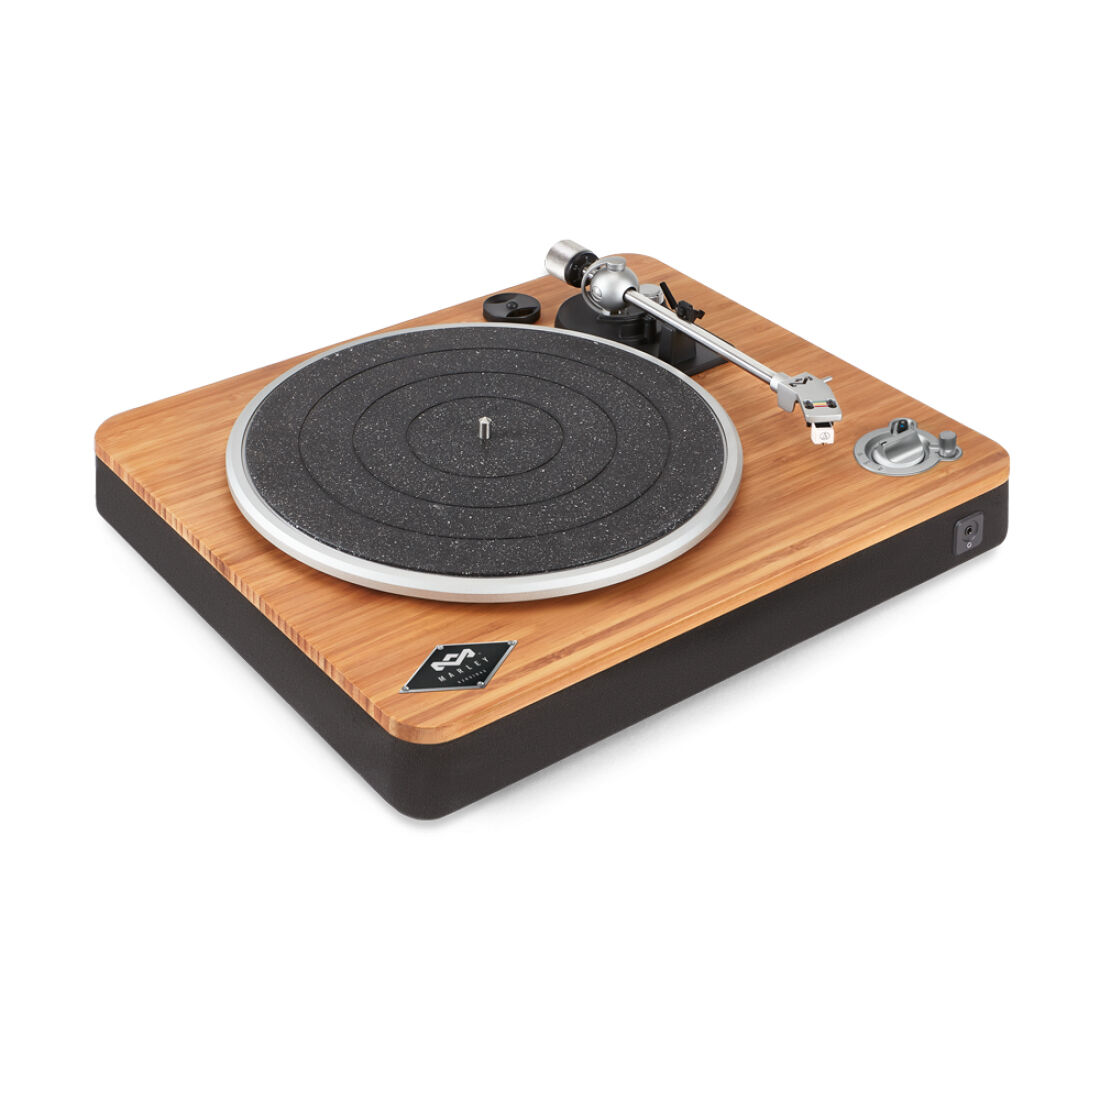 House Of Marley Turntable Stir It Up - Wireless